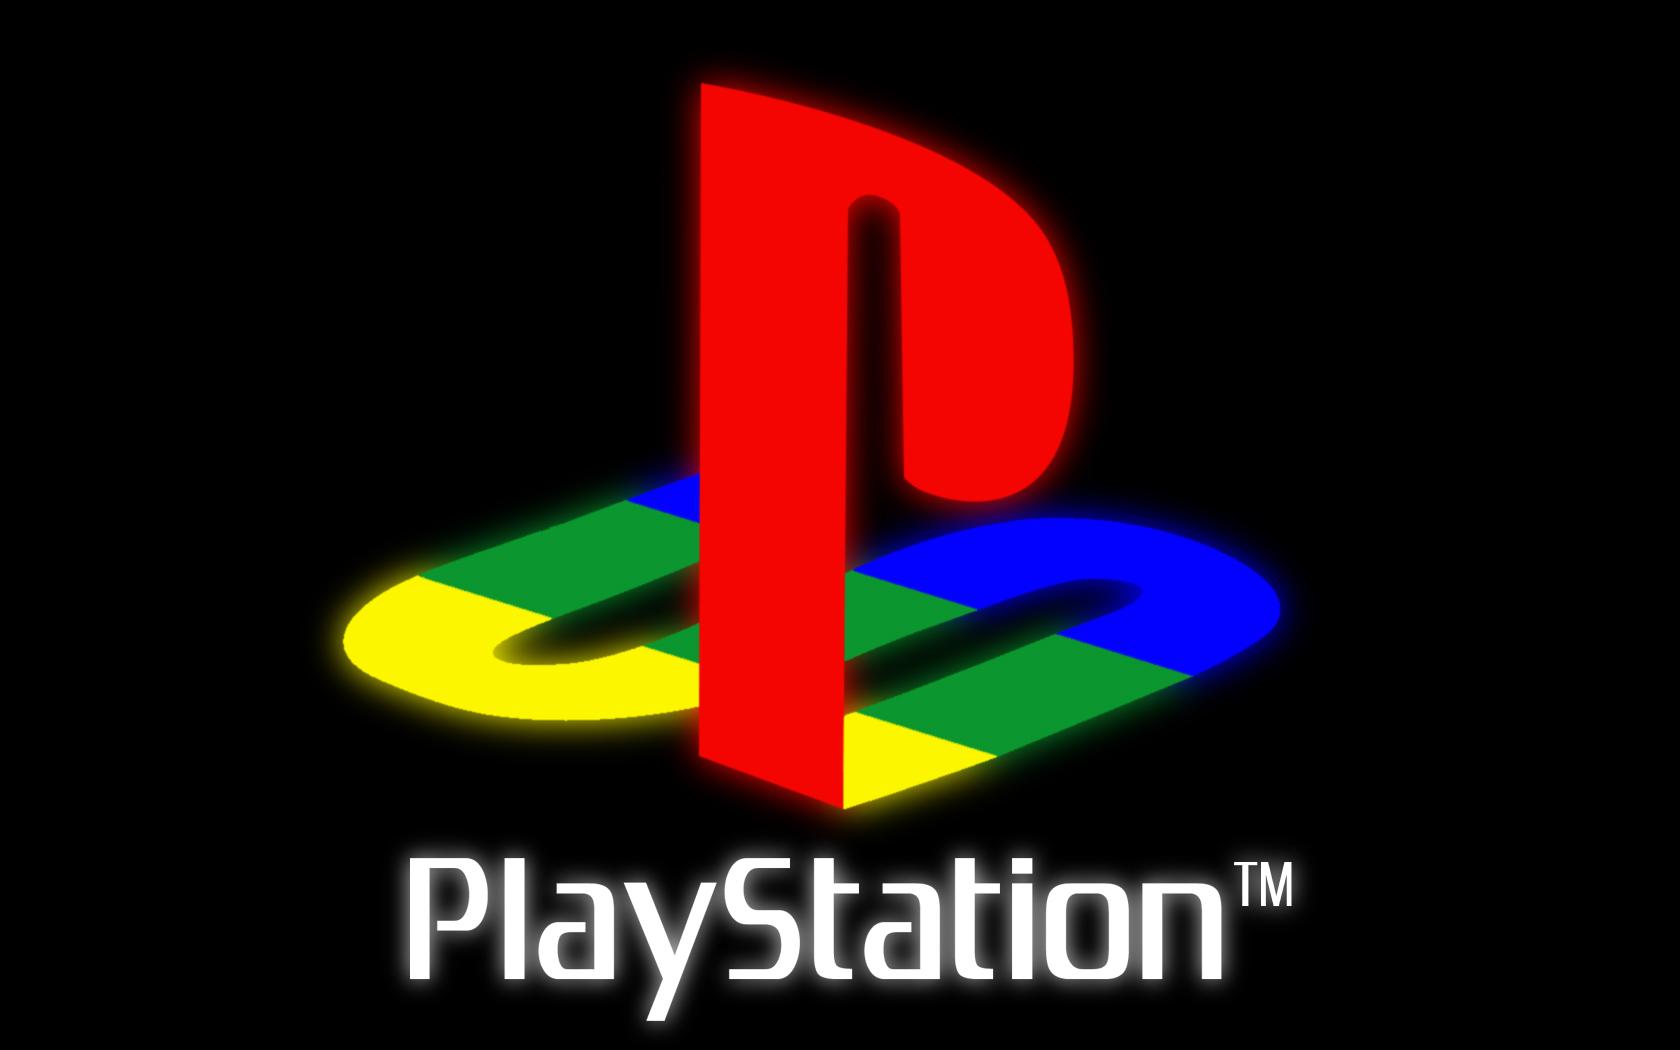 aesthetic playstation logo wallpapers wallpaper cave on aesthetic playstation logo wallpapers